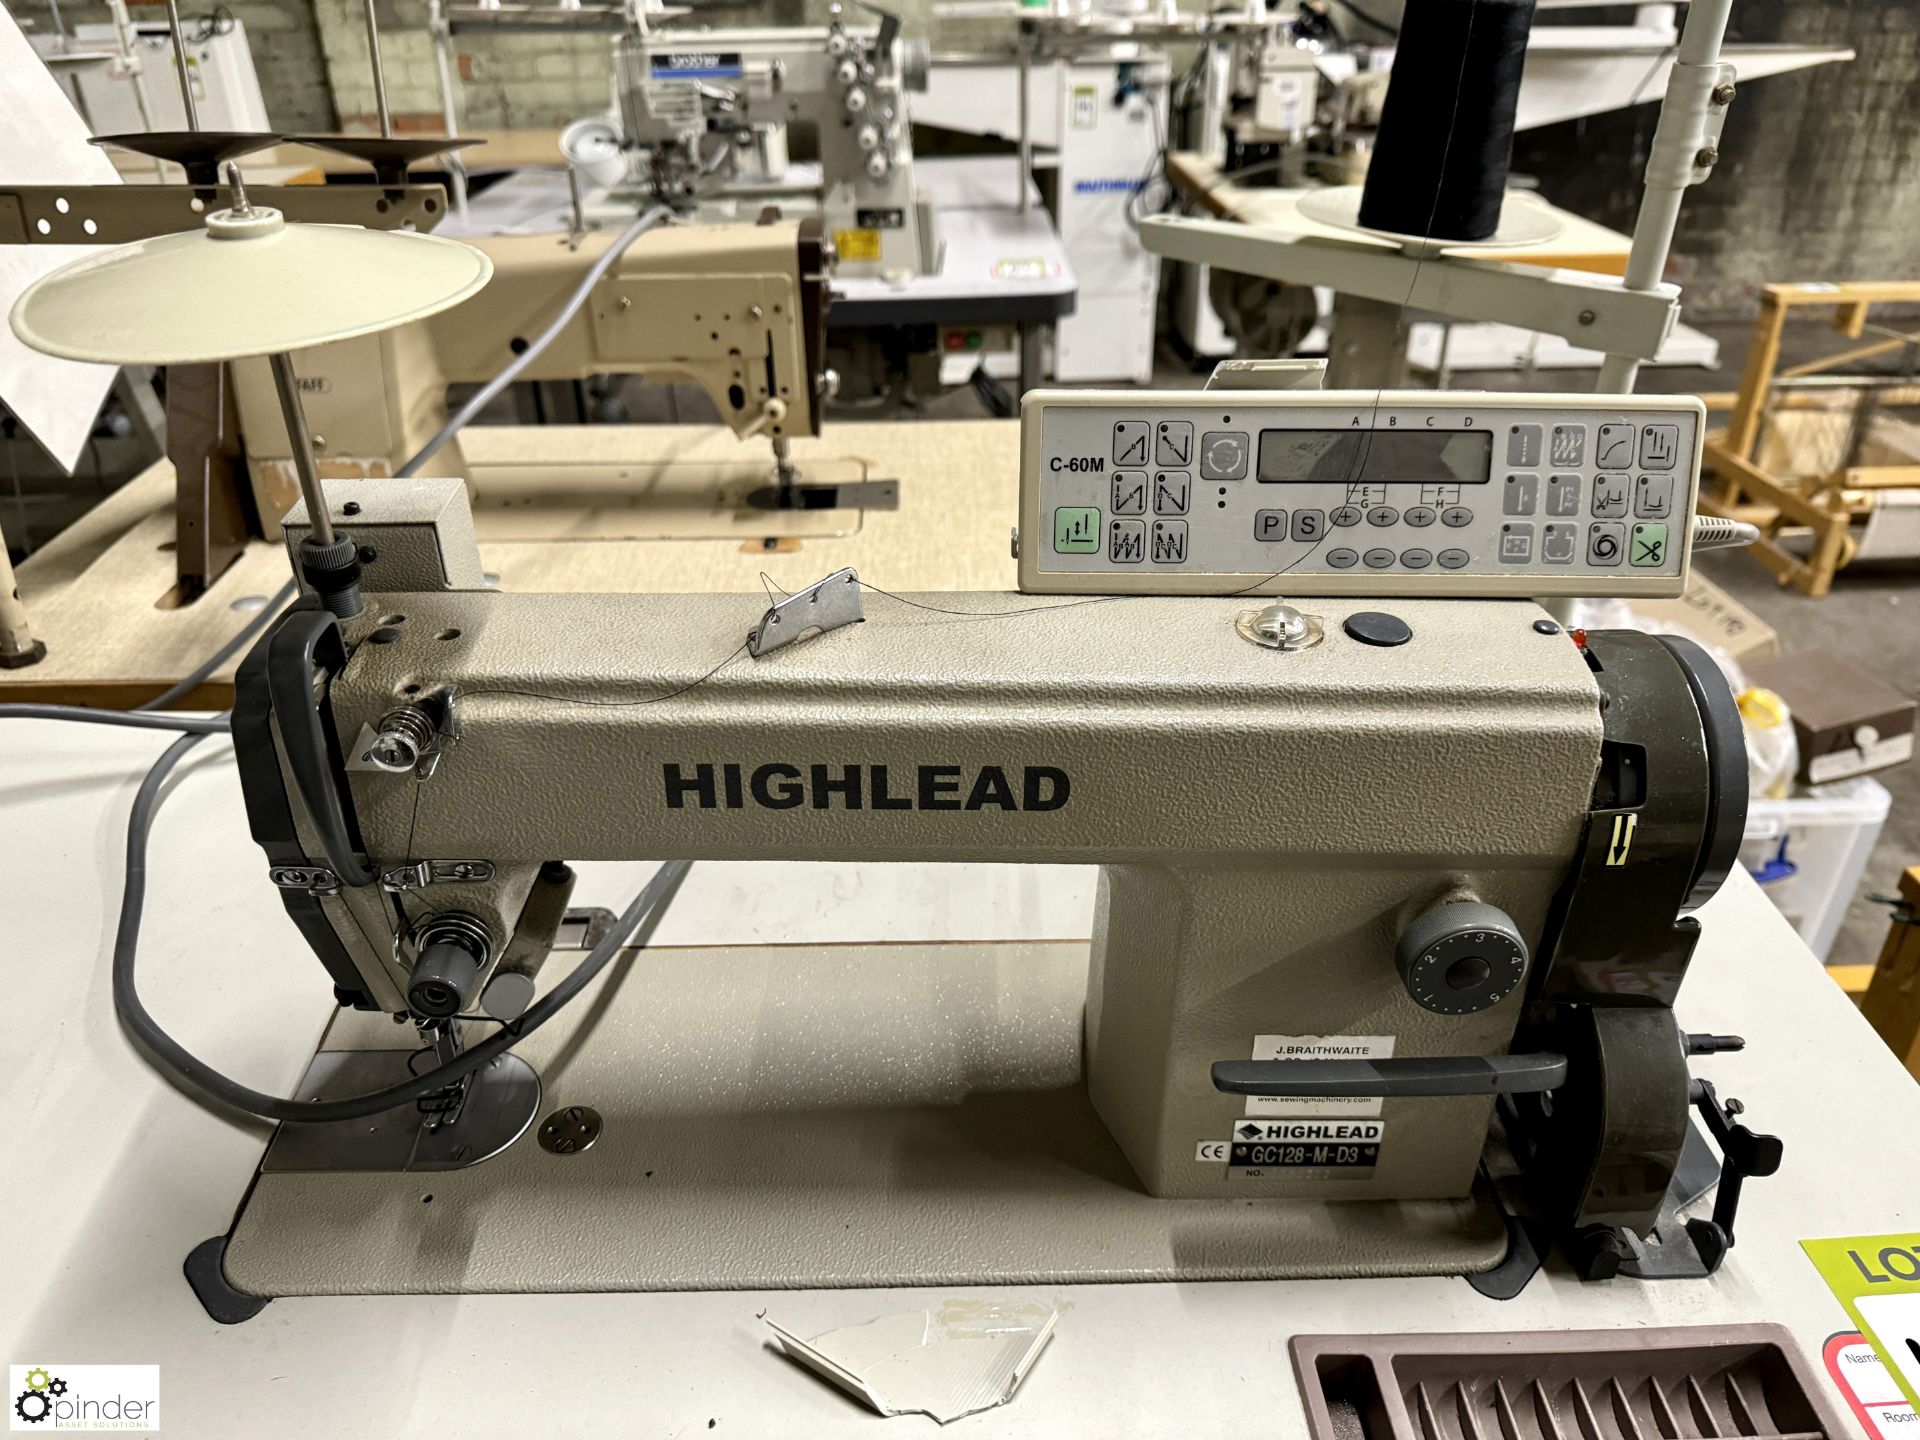 Highland GC128-M-D3 flat bed Lockstitch, 240volts, with C-60M programmable control (damaged) - Image 2 of 5